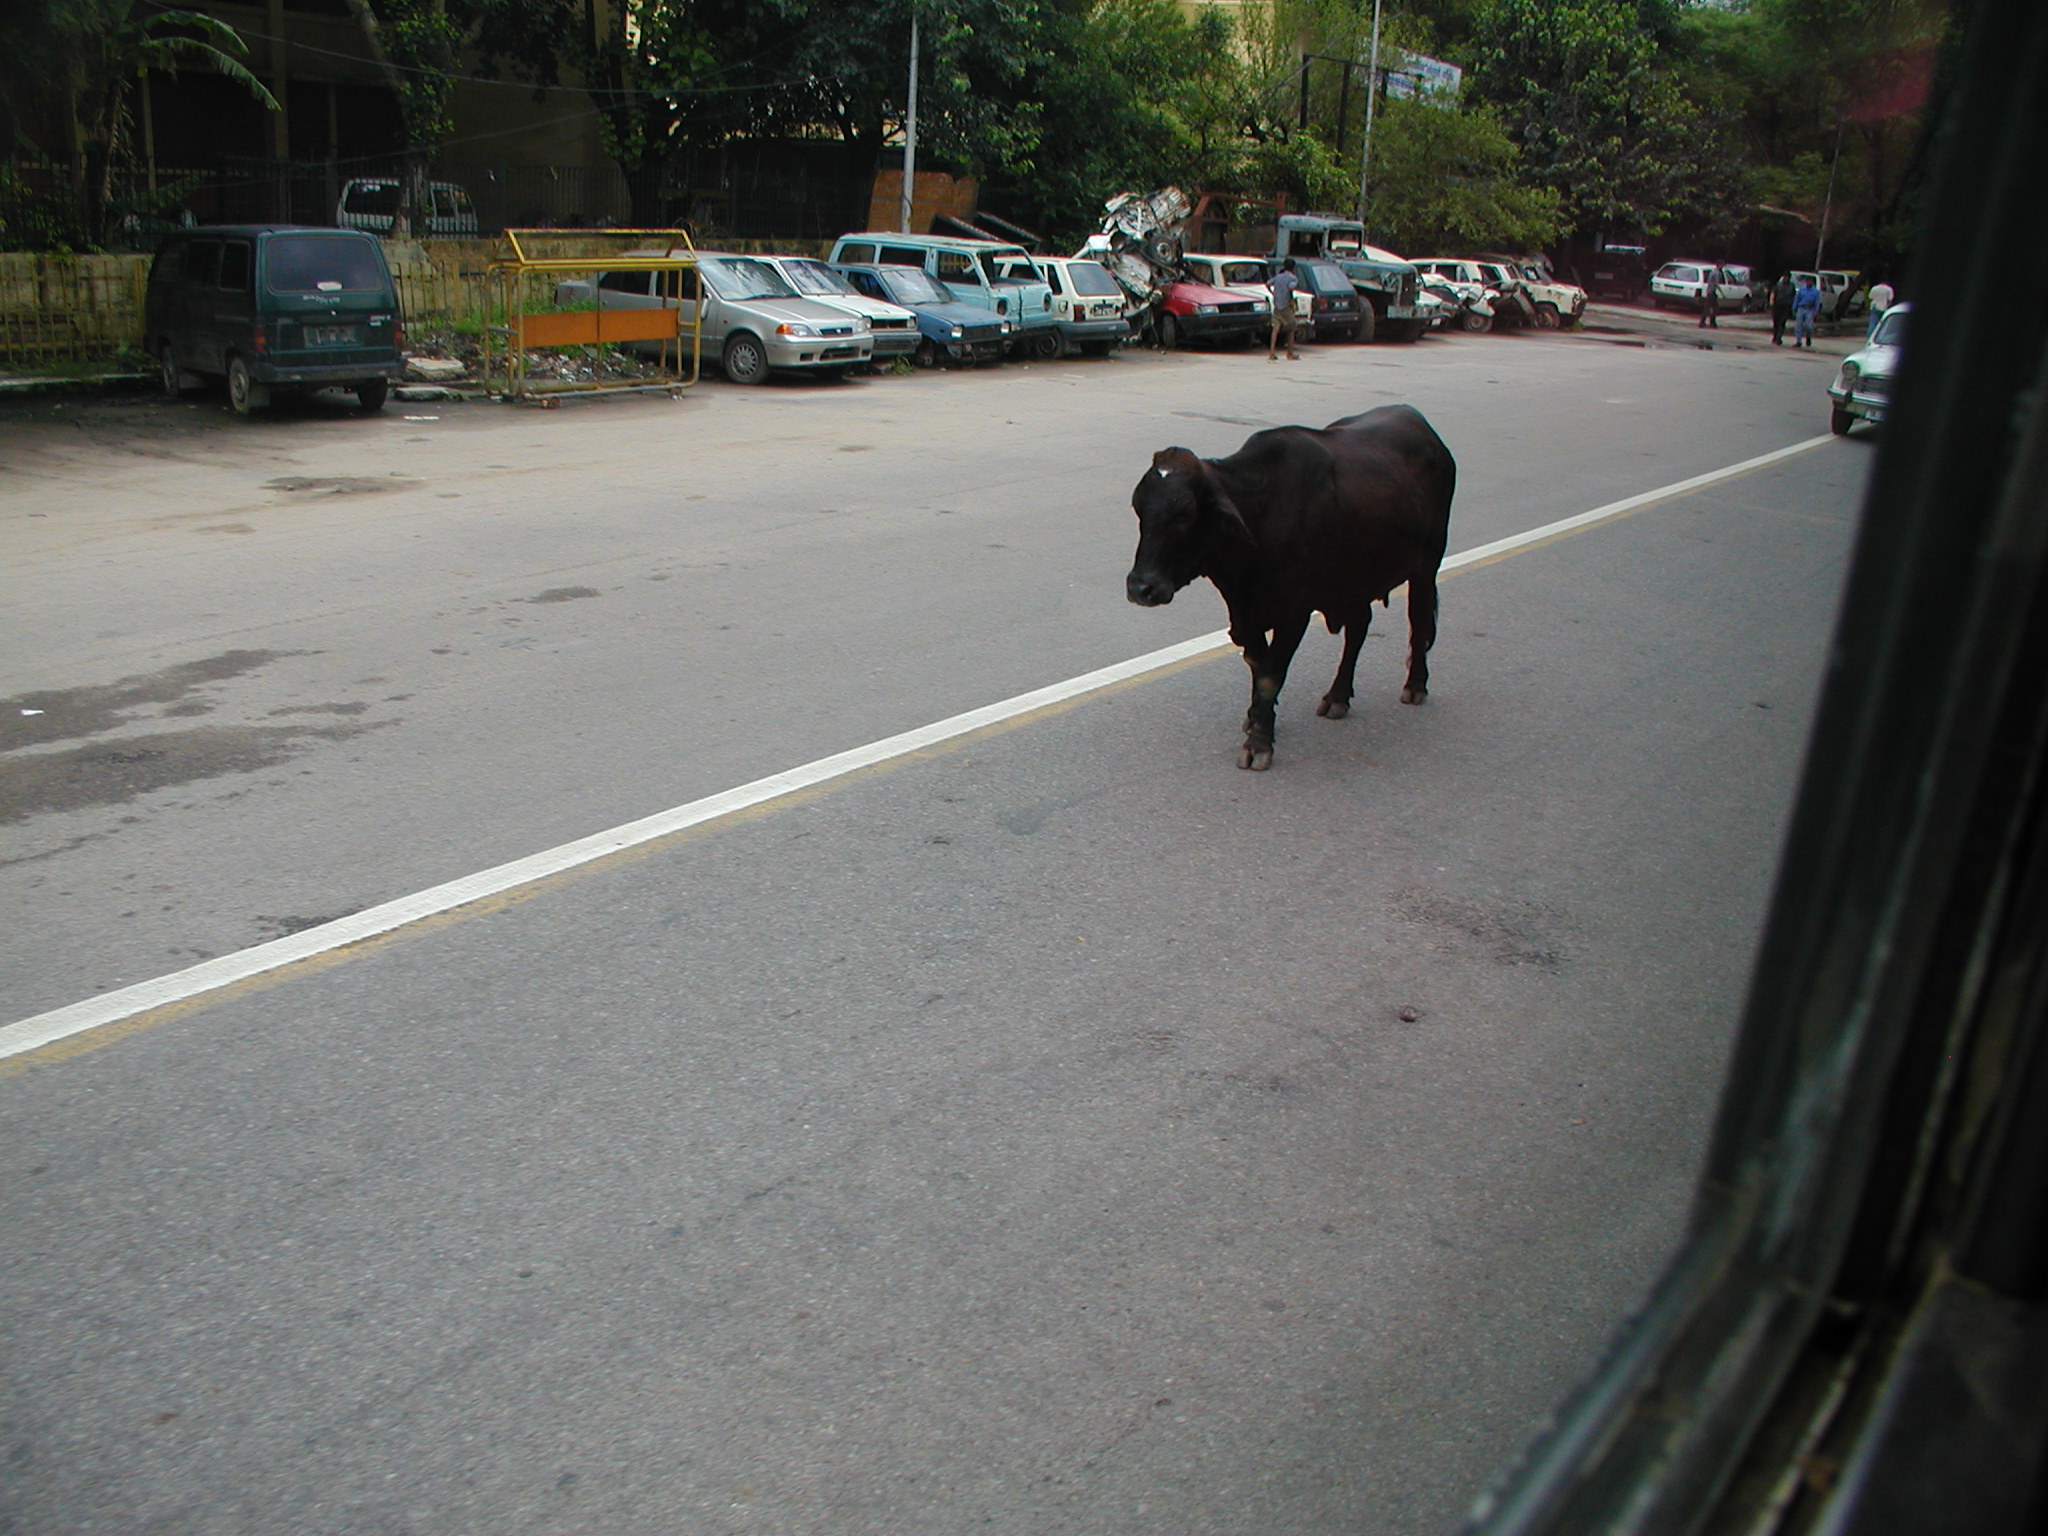 A cow on the street 